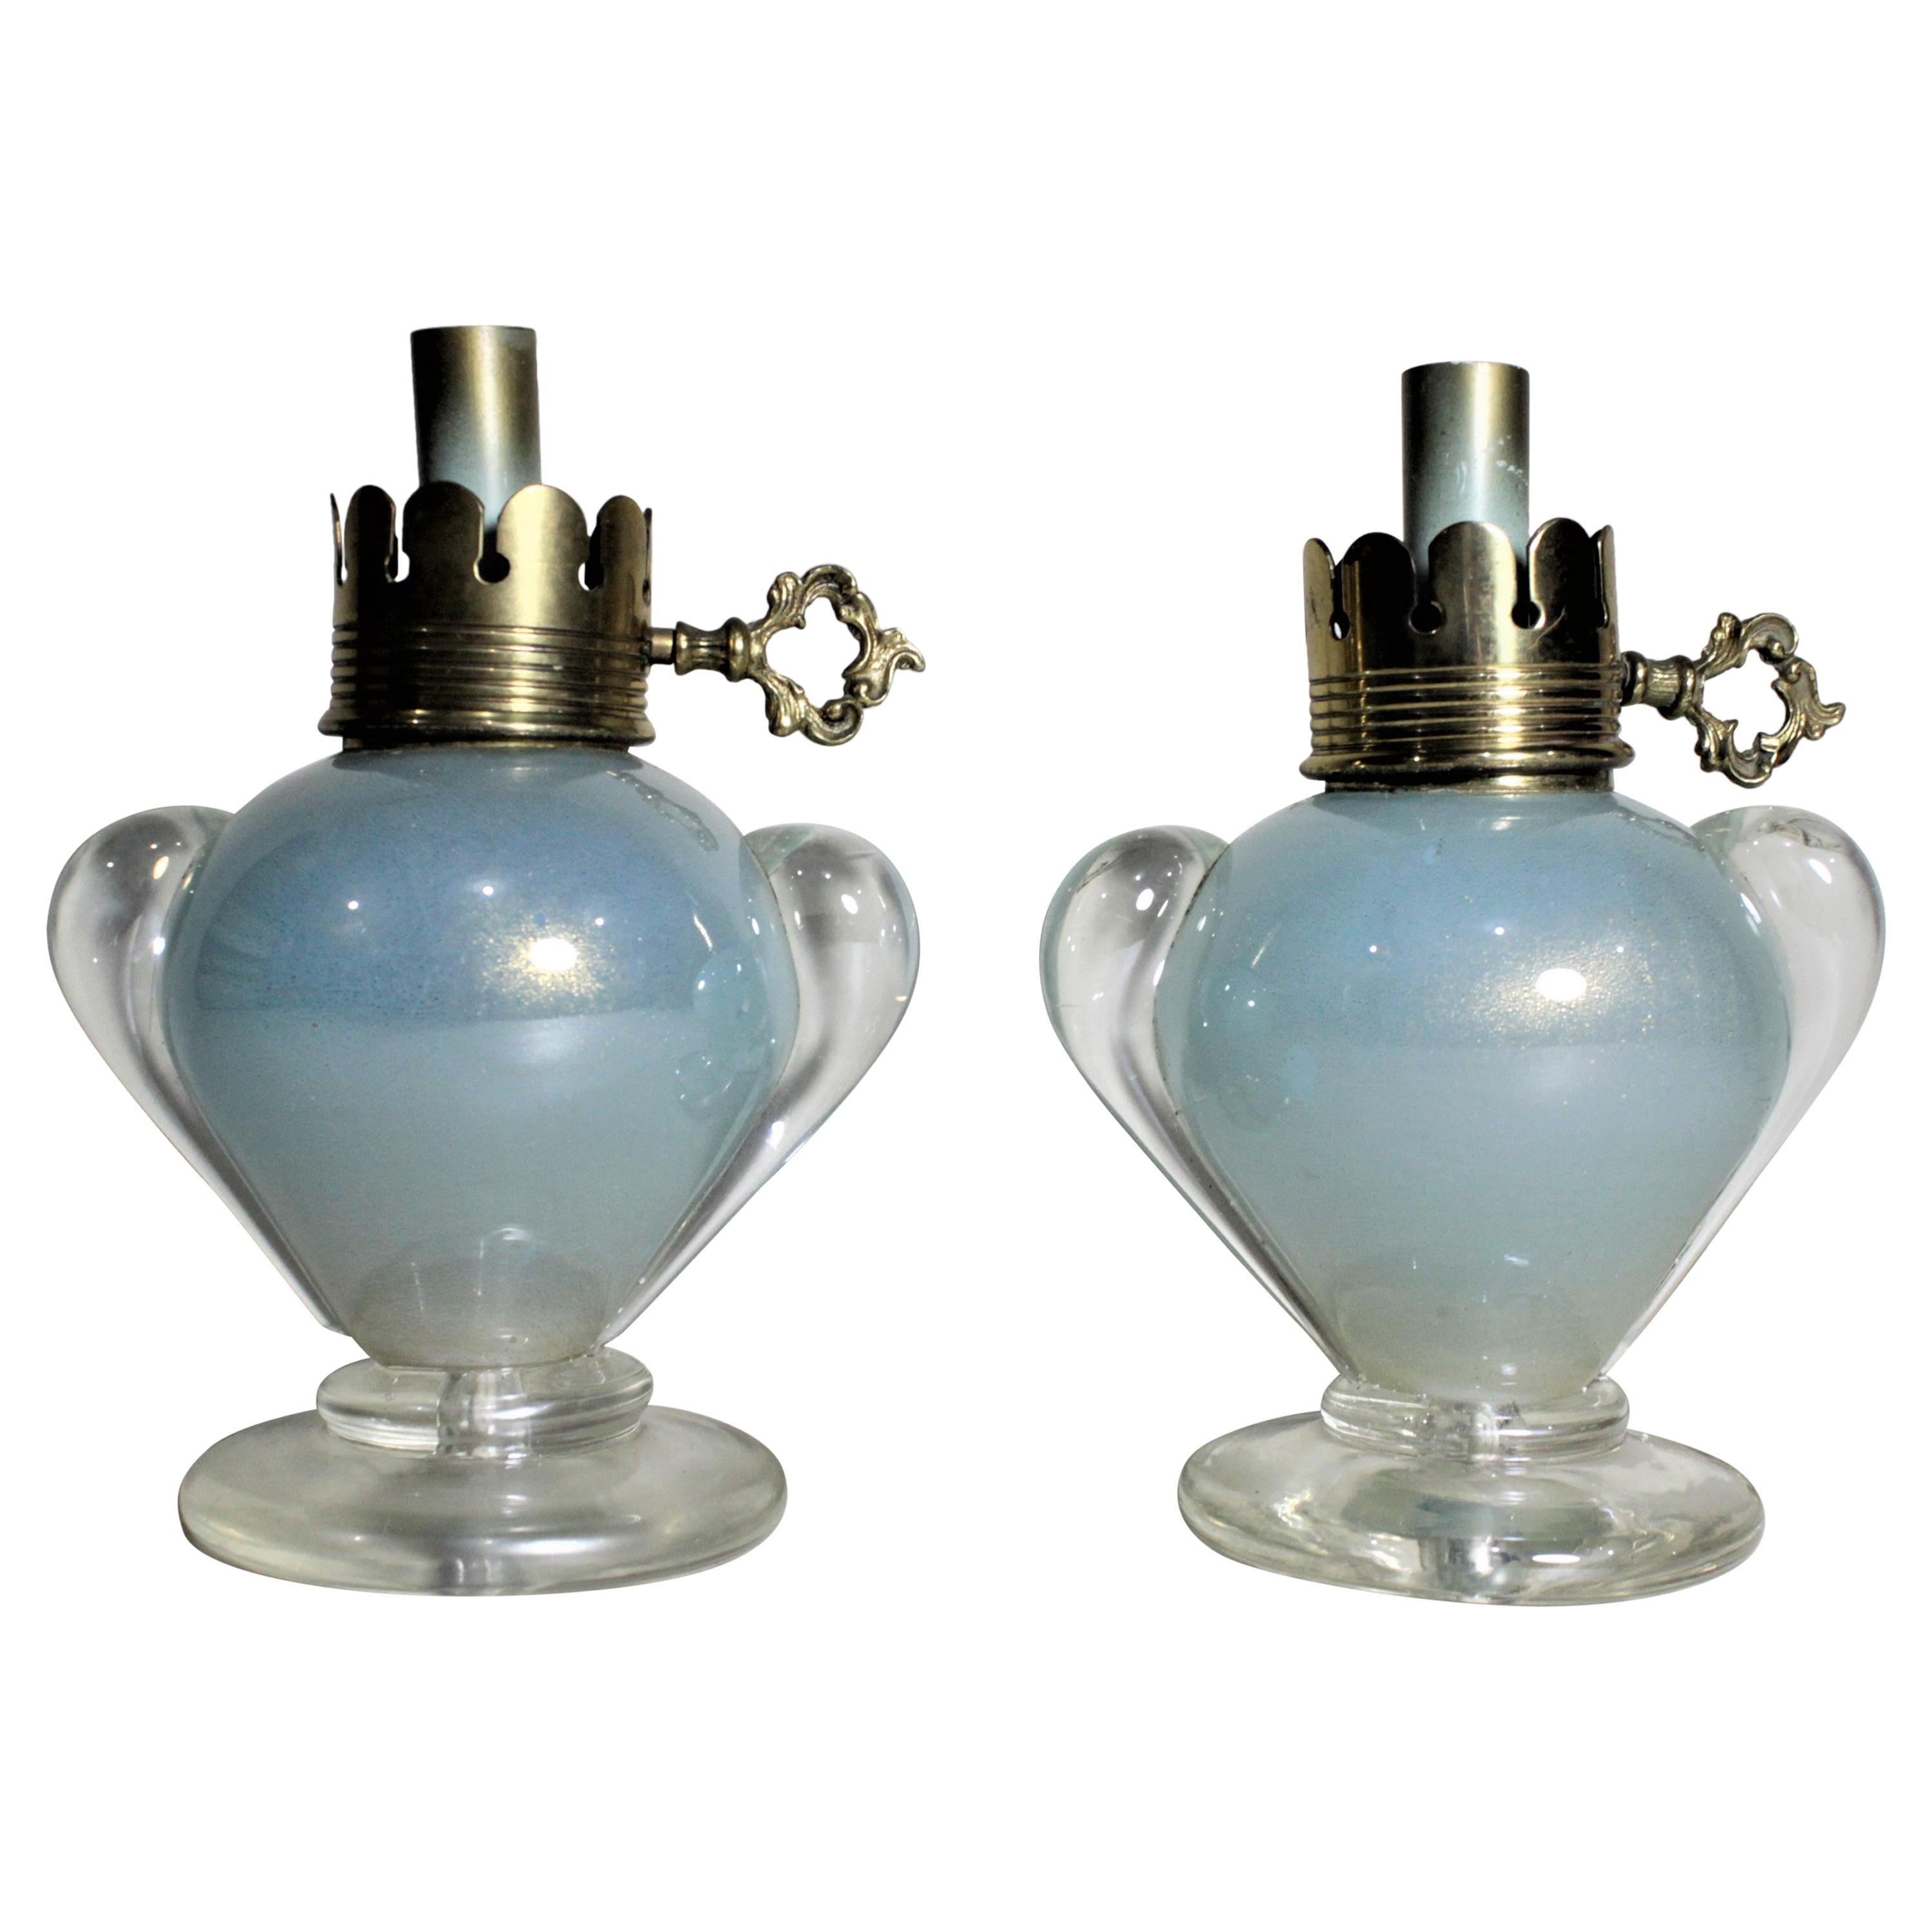 Pair of Vintage Murano Lantern Styled Art Glass Table or Bedroom Accent Lamps For Sale